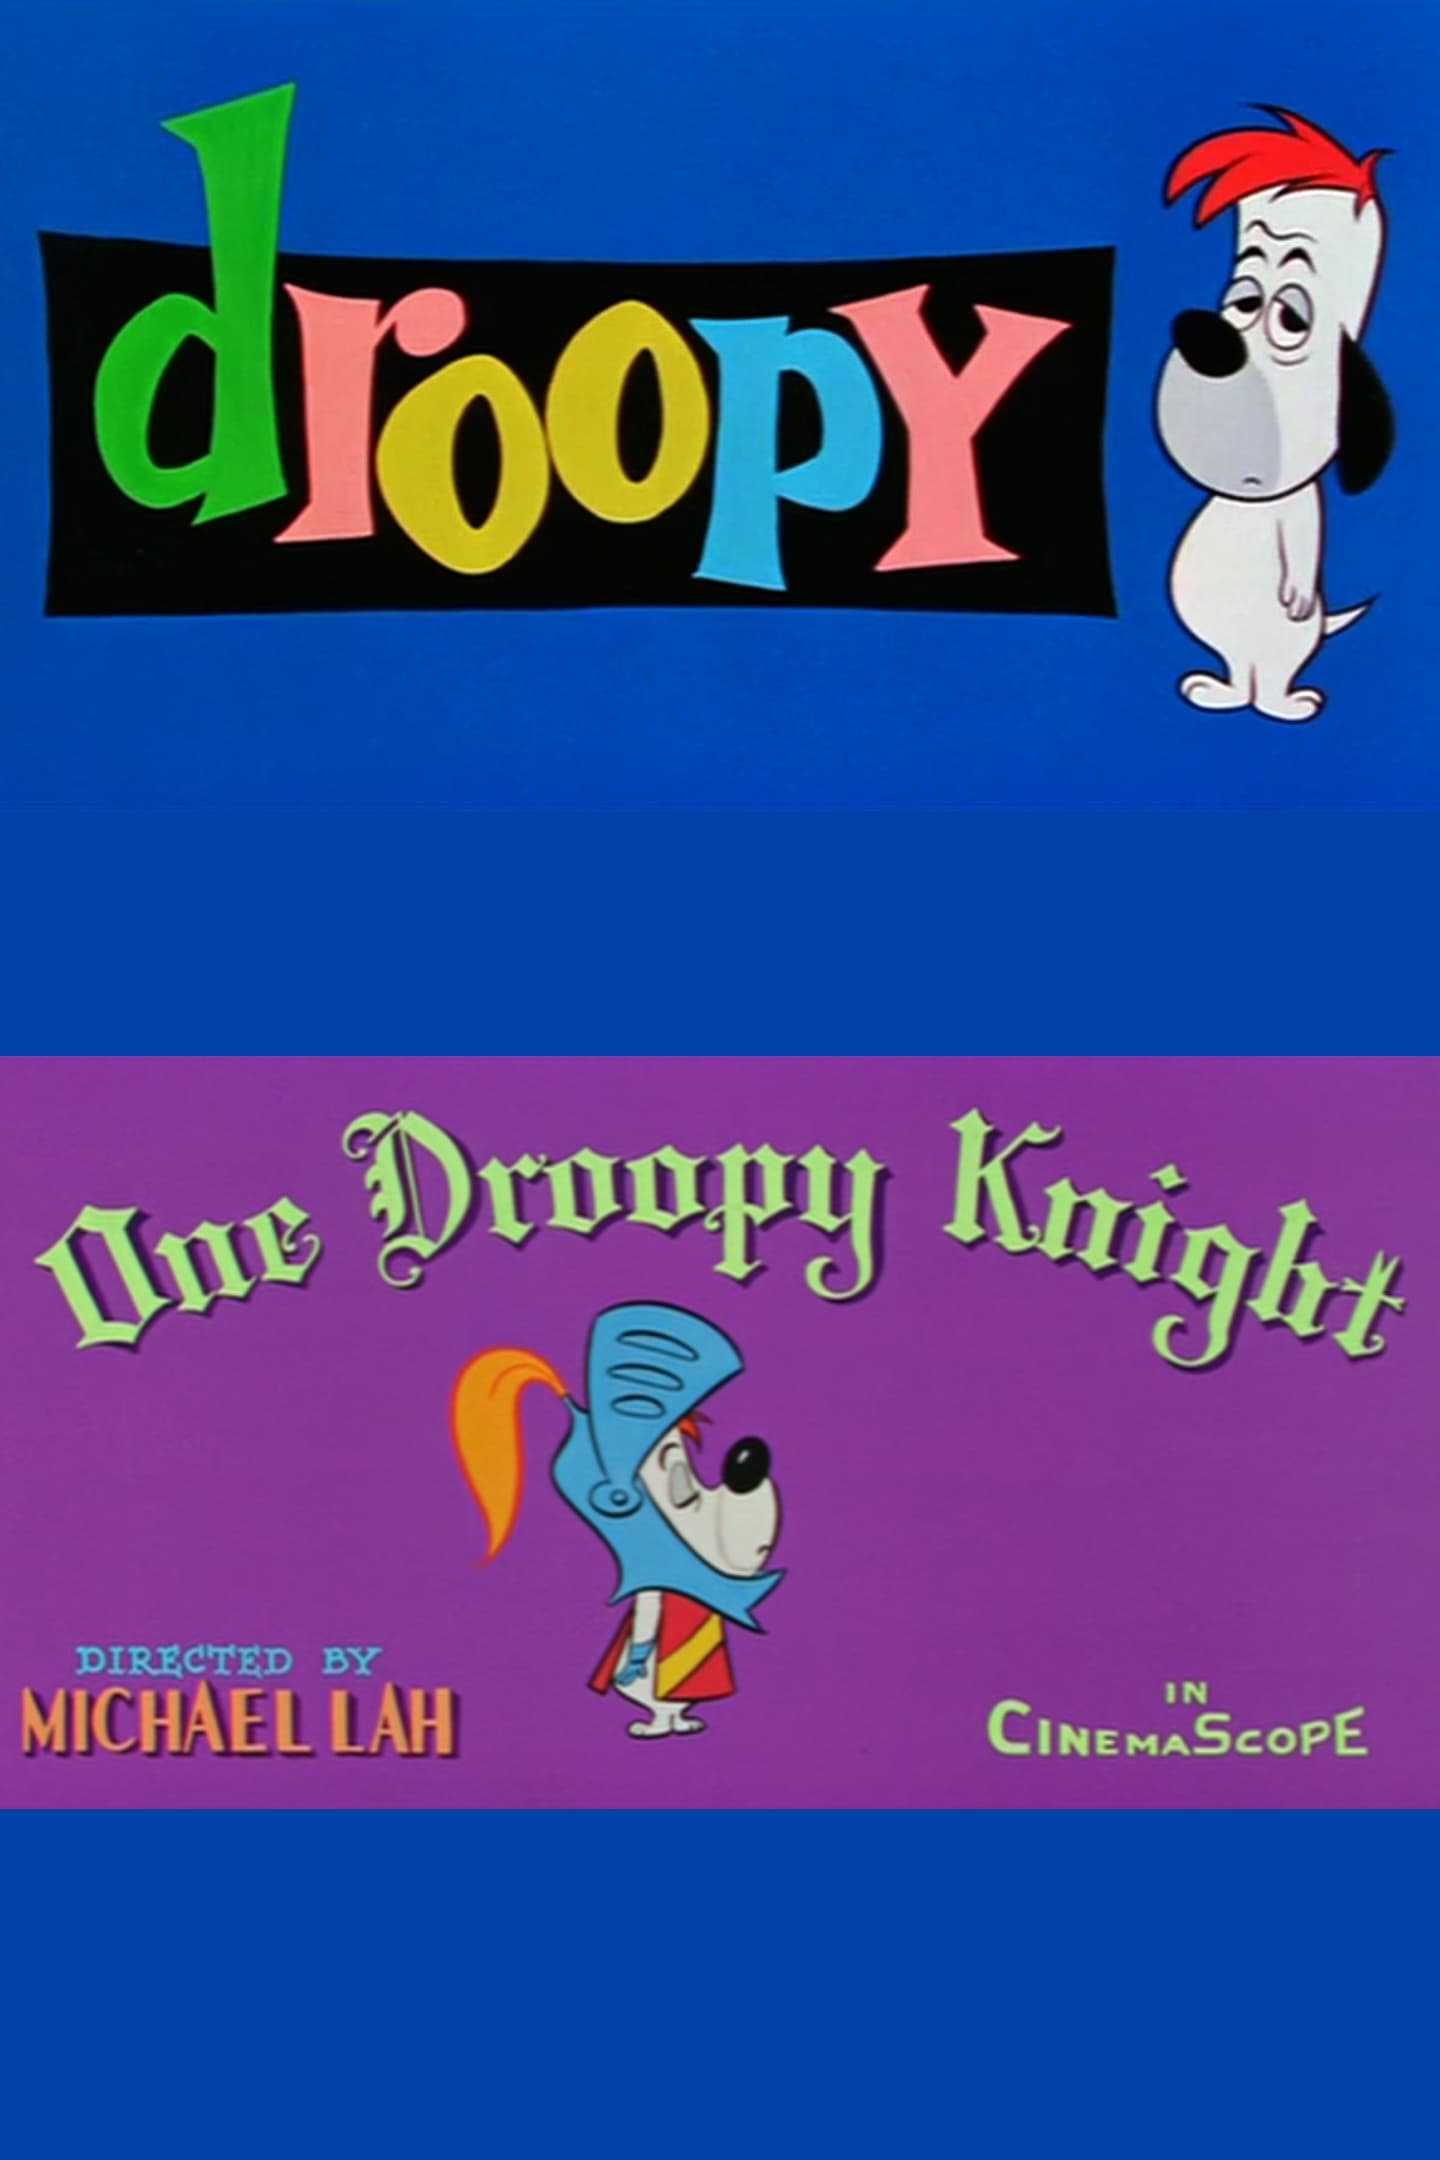 One Droopy Knight (1957)